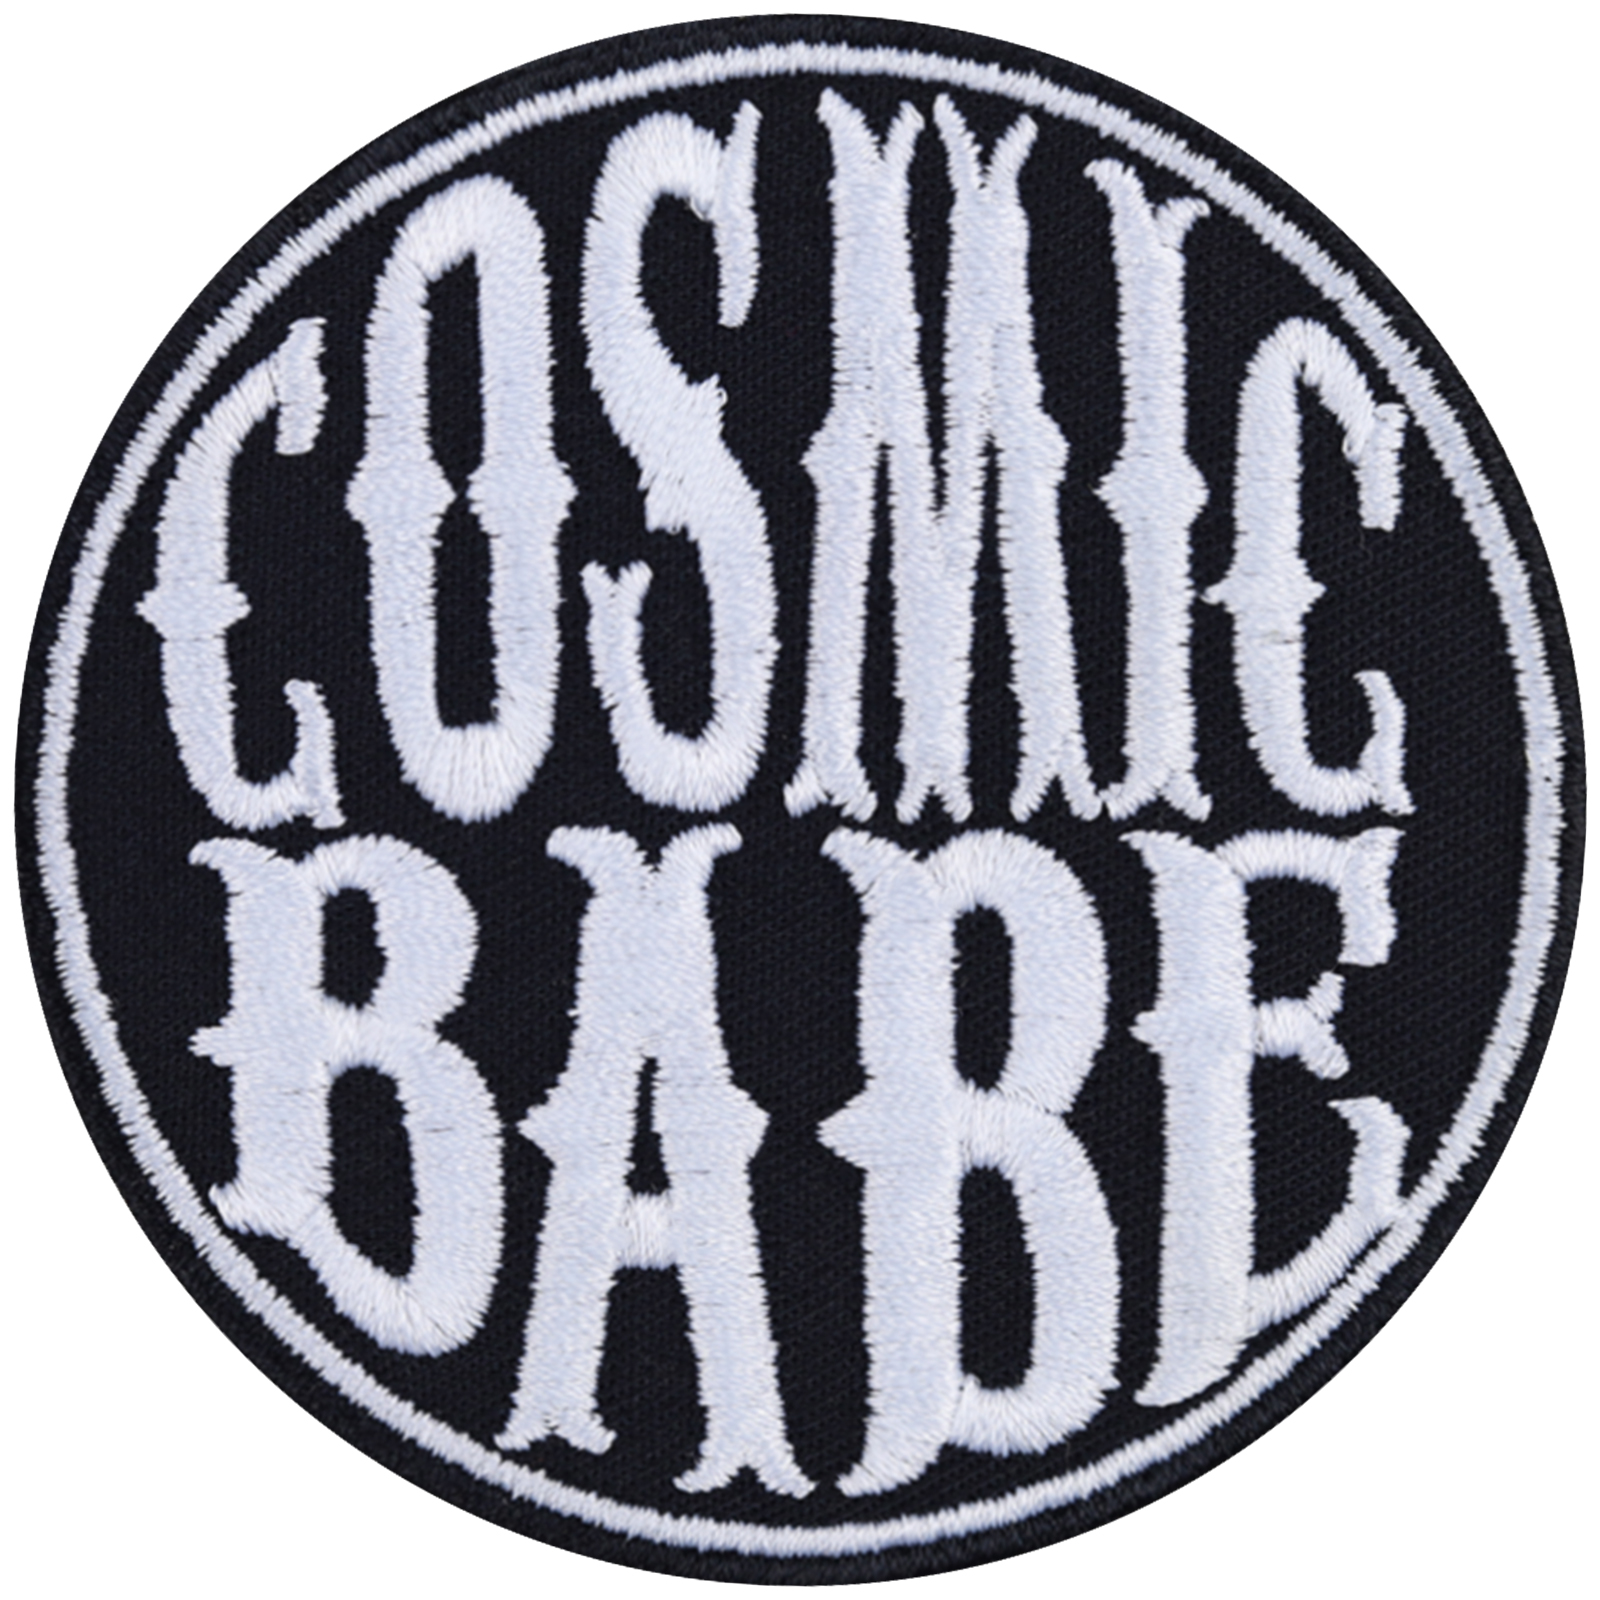 Cosmic babe - Patch